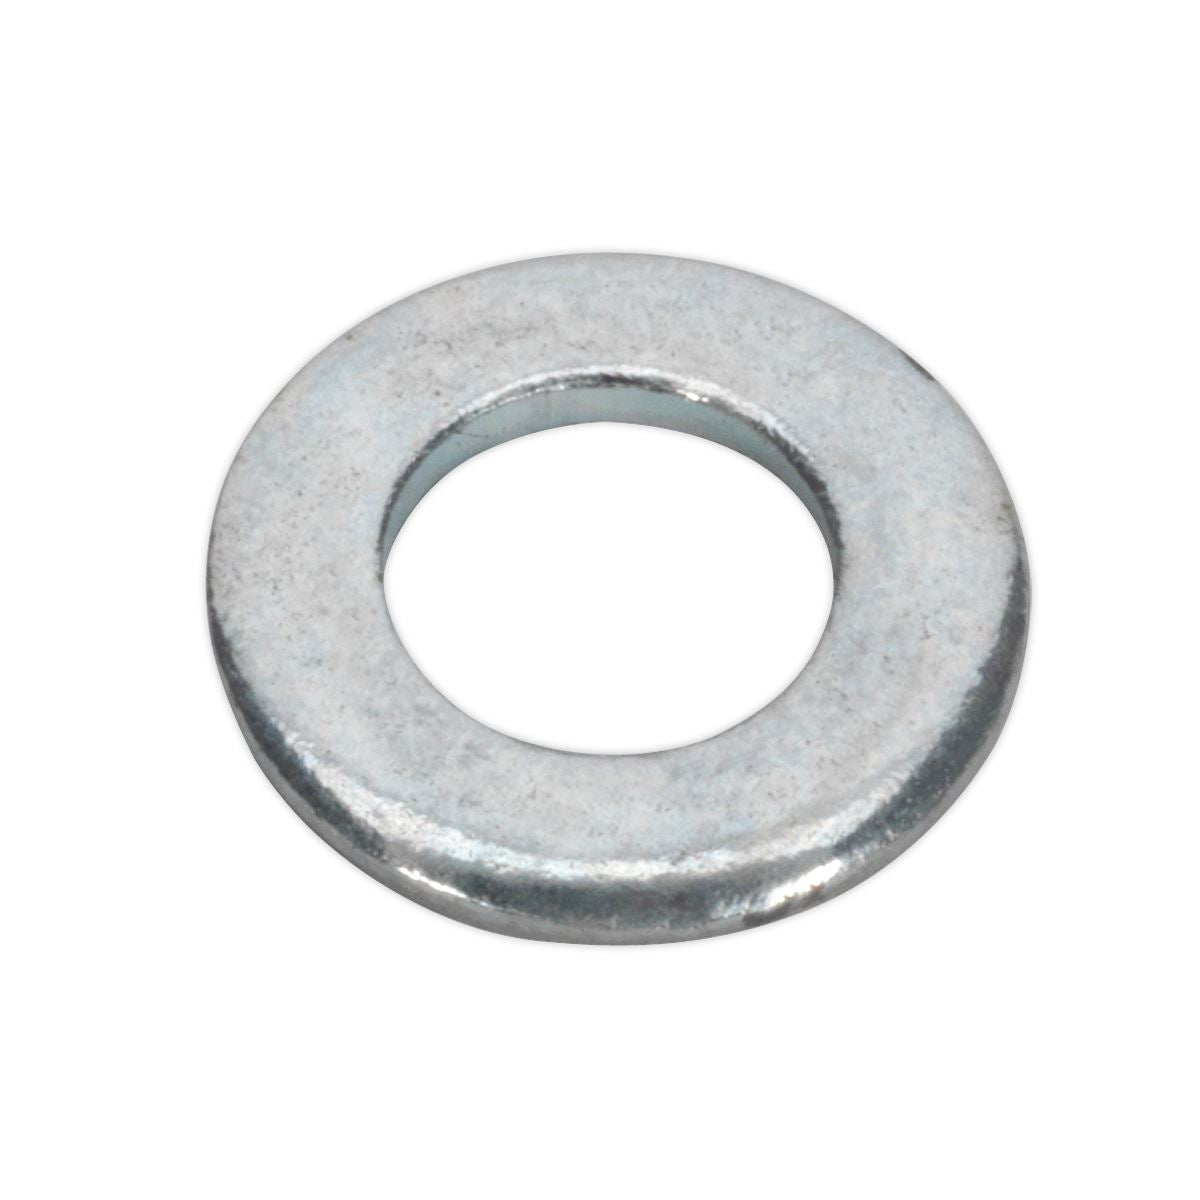 Sealey Flat Washer DIN 125 - M4 x 9mm Form A Zinc Pack of 100